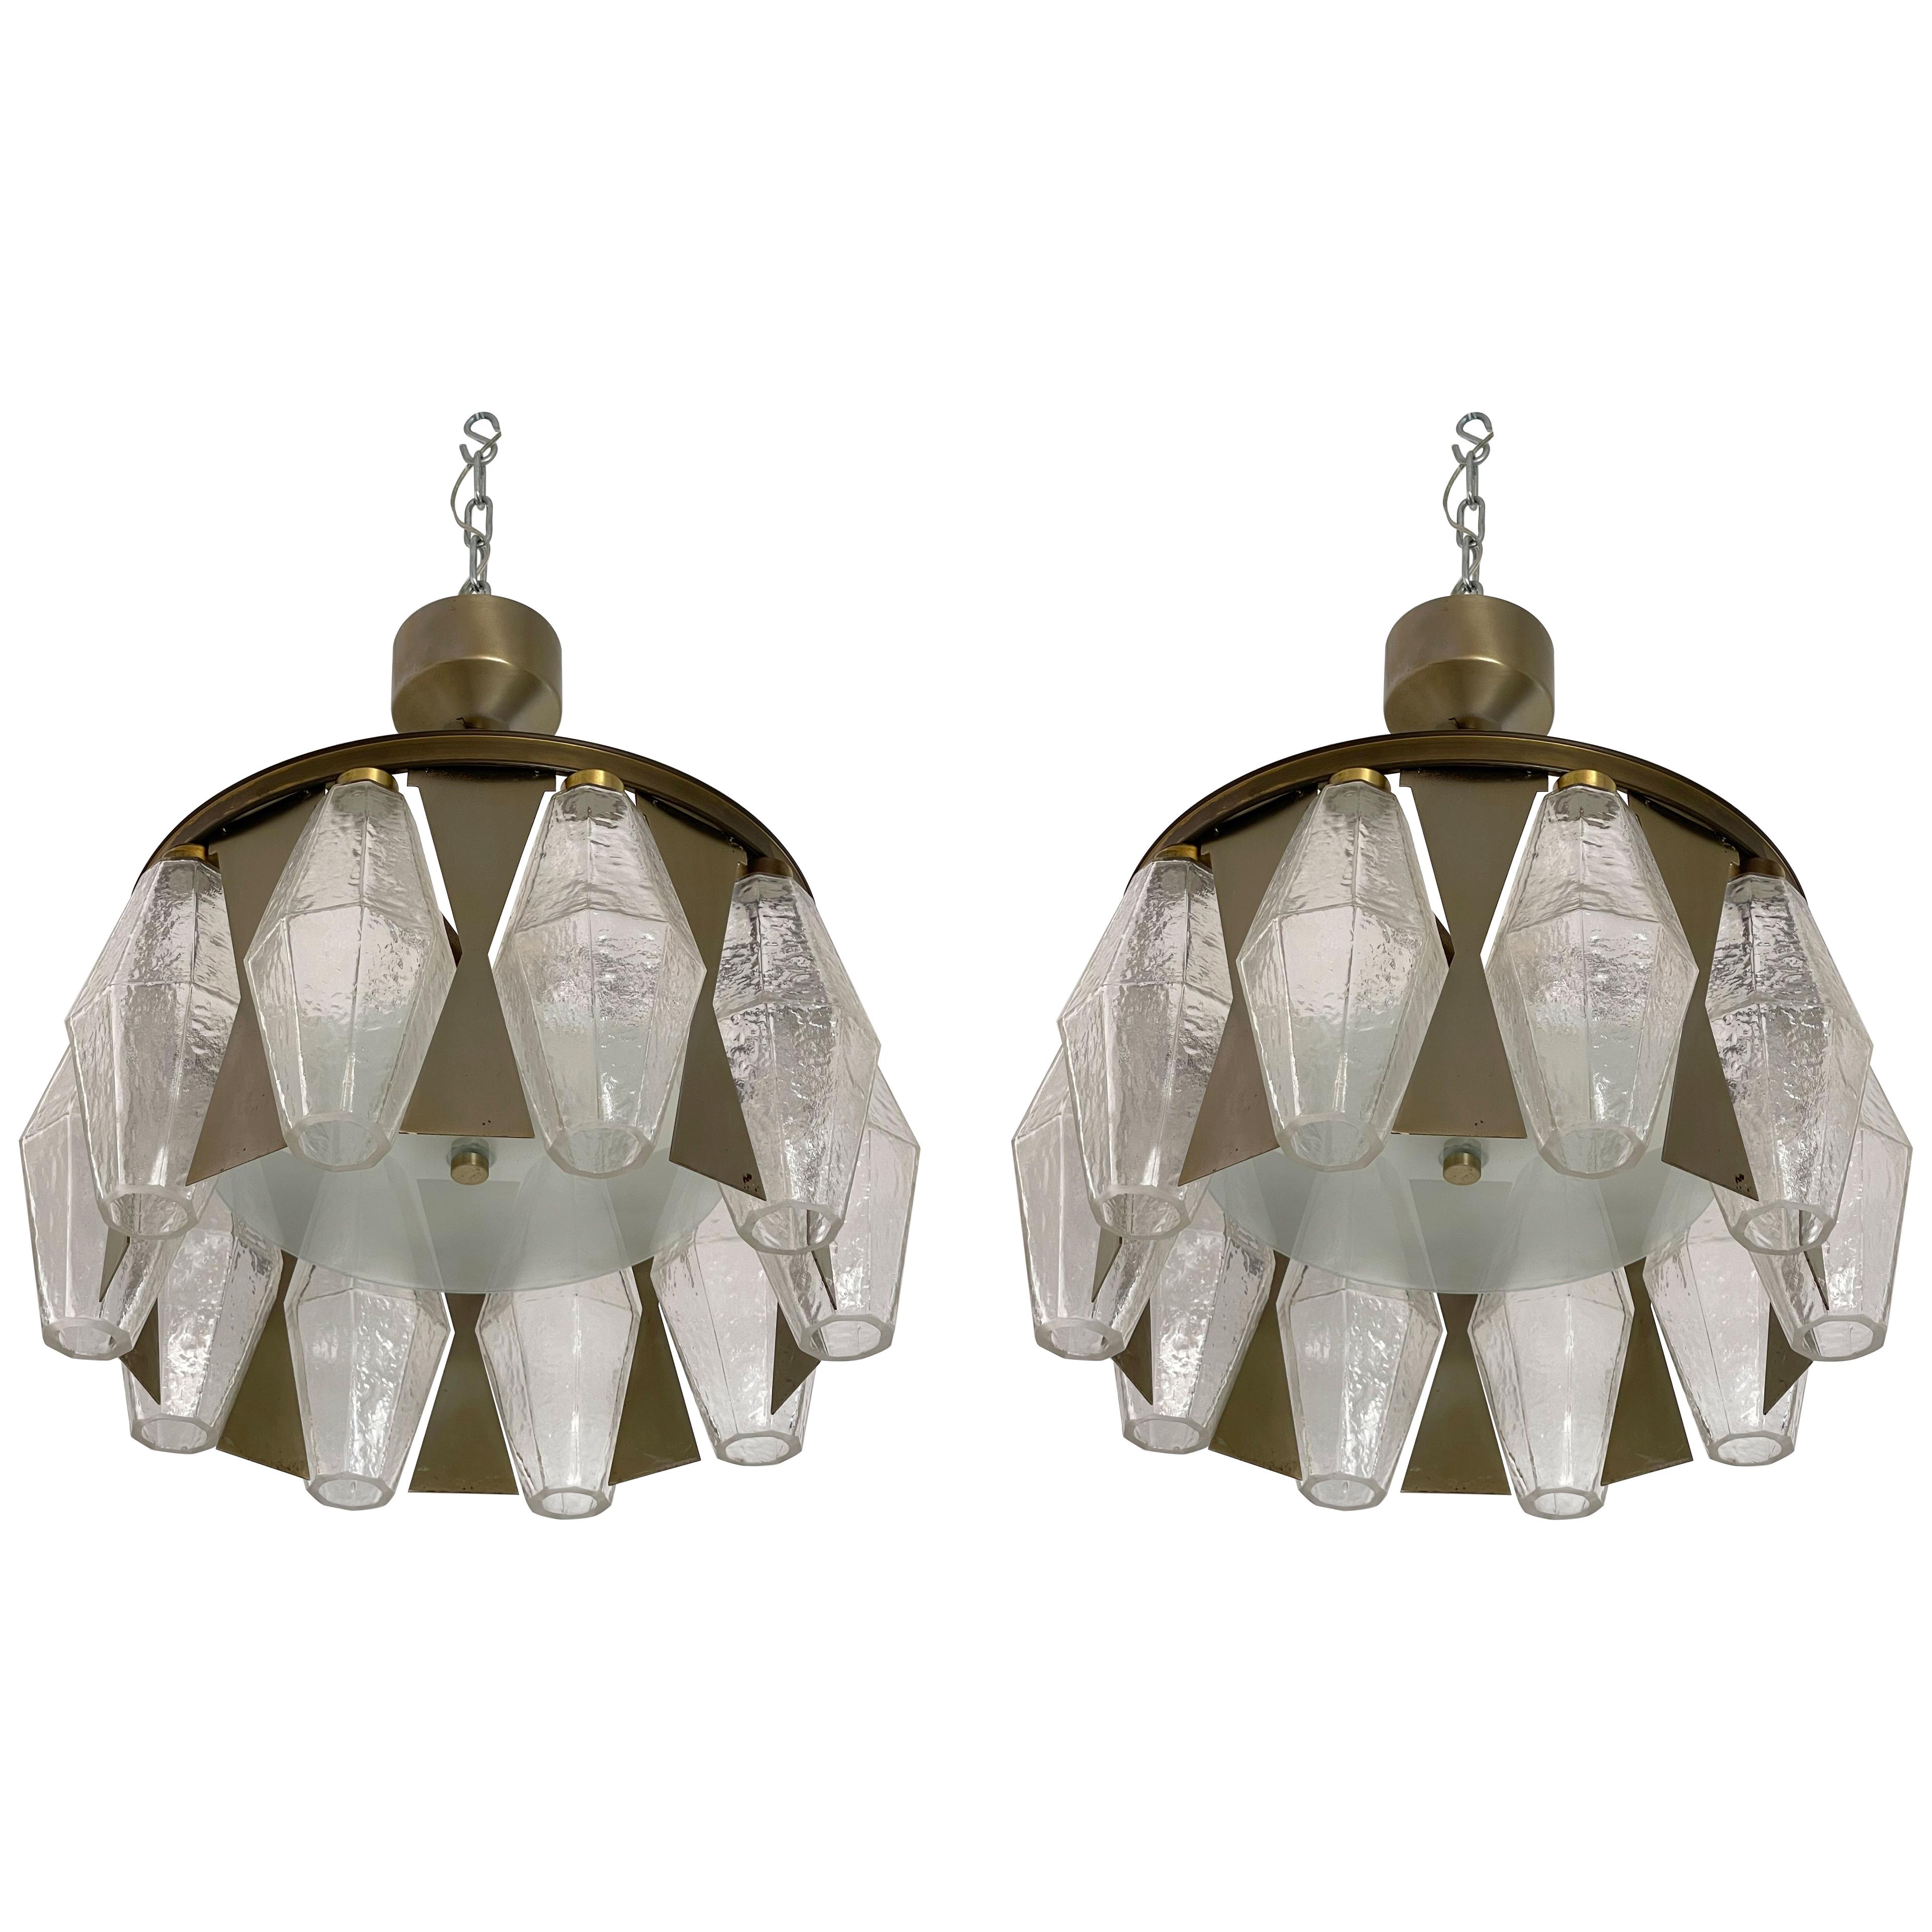 Pair of Metal Brass Murano Glass Pendant Lights by Aureliano Toso. Italy, 1960s